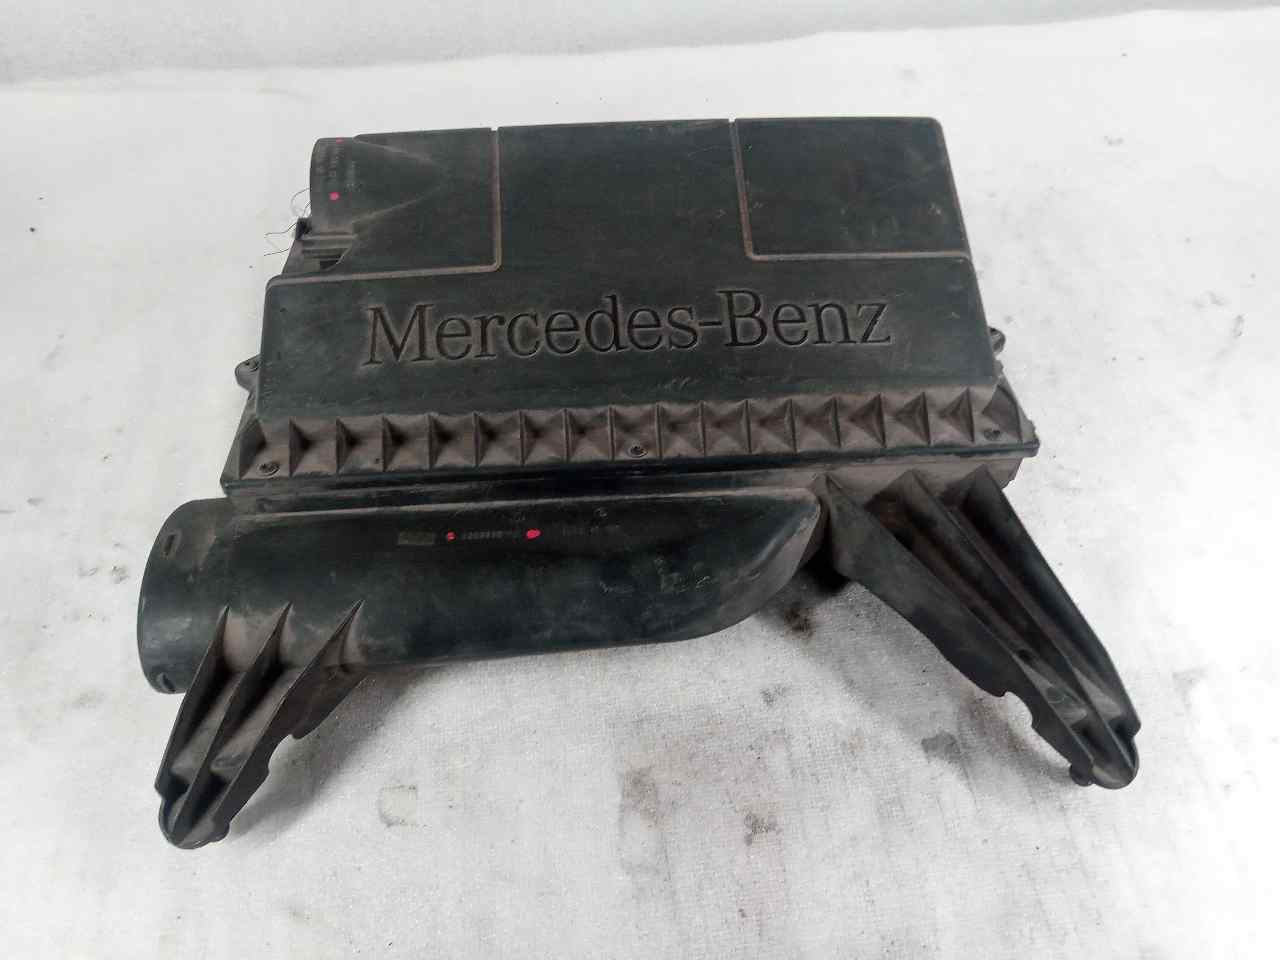 MERCEDES-BENZ M-Class W163 (1997-2005) Other Engine Compartment Parts A6395281306 23967180